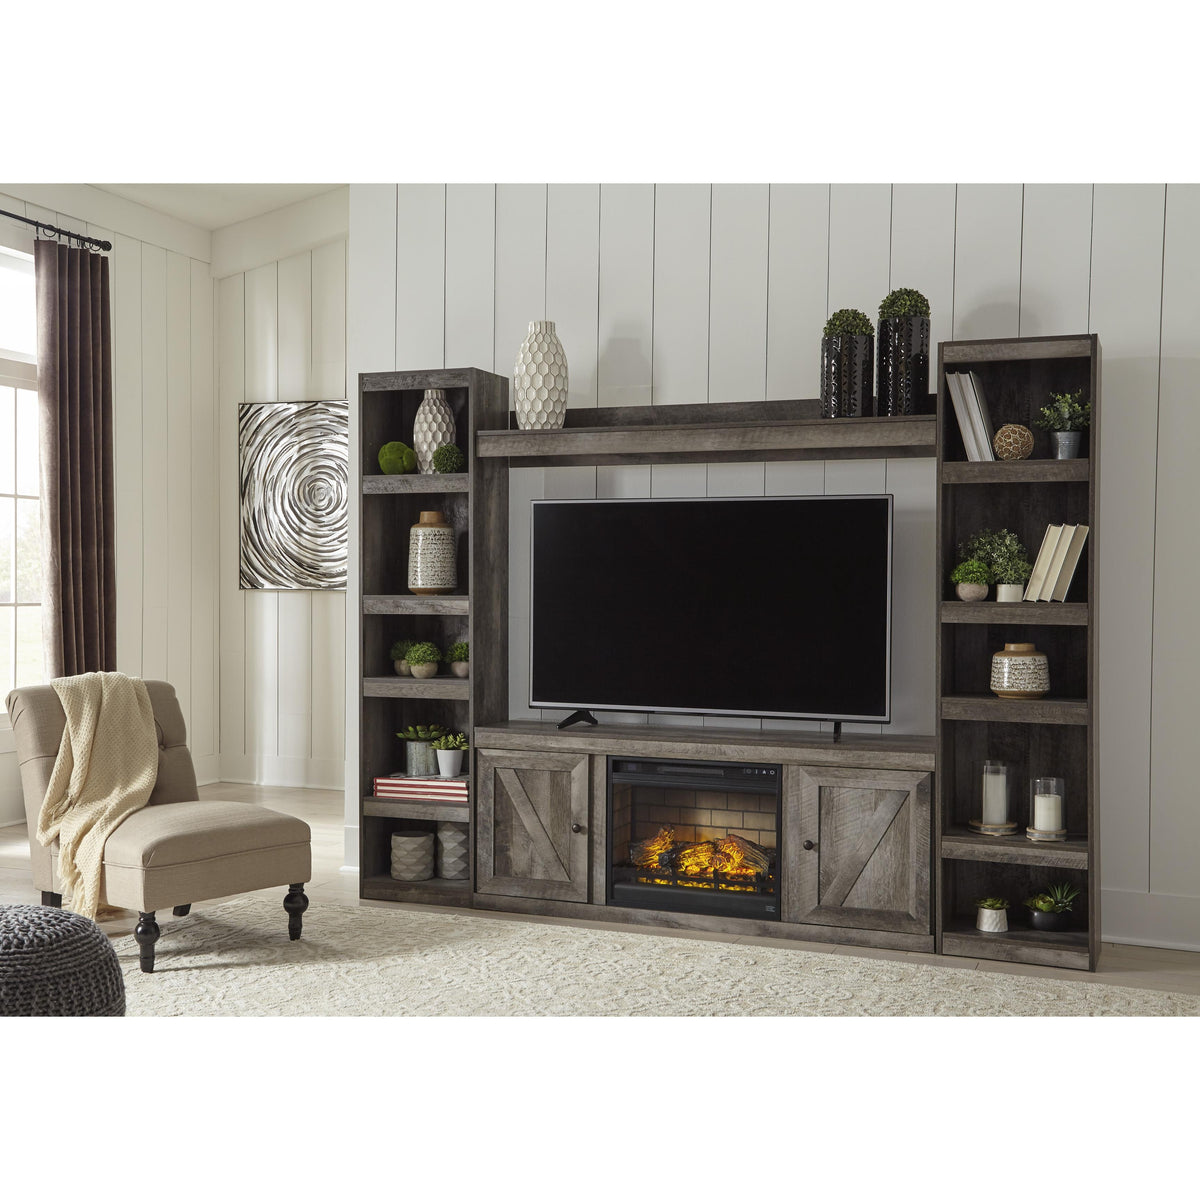 Signature Design by Ashley Wynnlow EW0440W8 4 pc Entertainment Center with Electric Fireplace